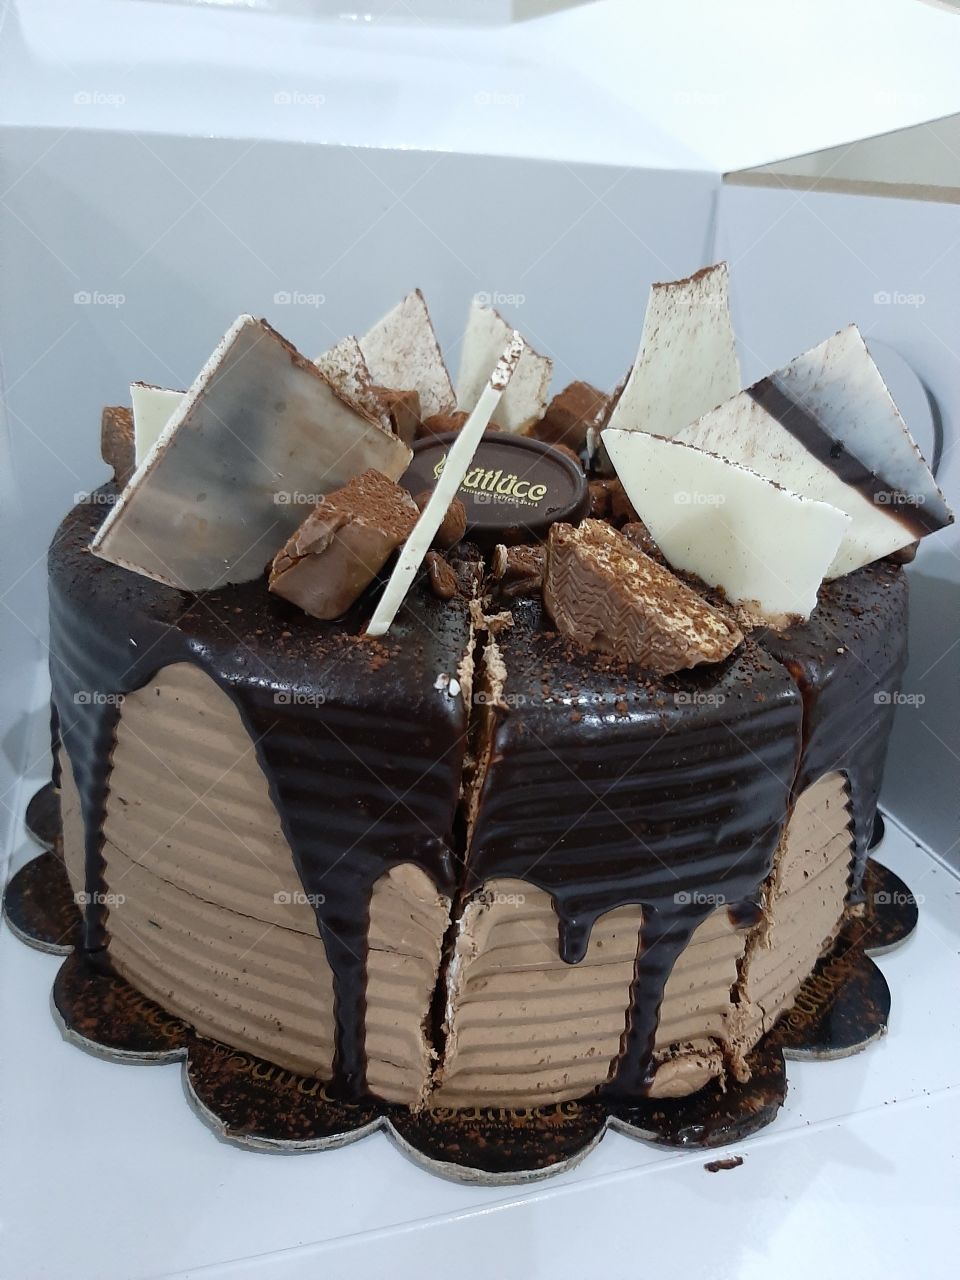 A choclate cake with sneackers pieces and milk and cacao choclate